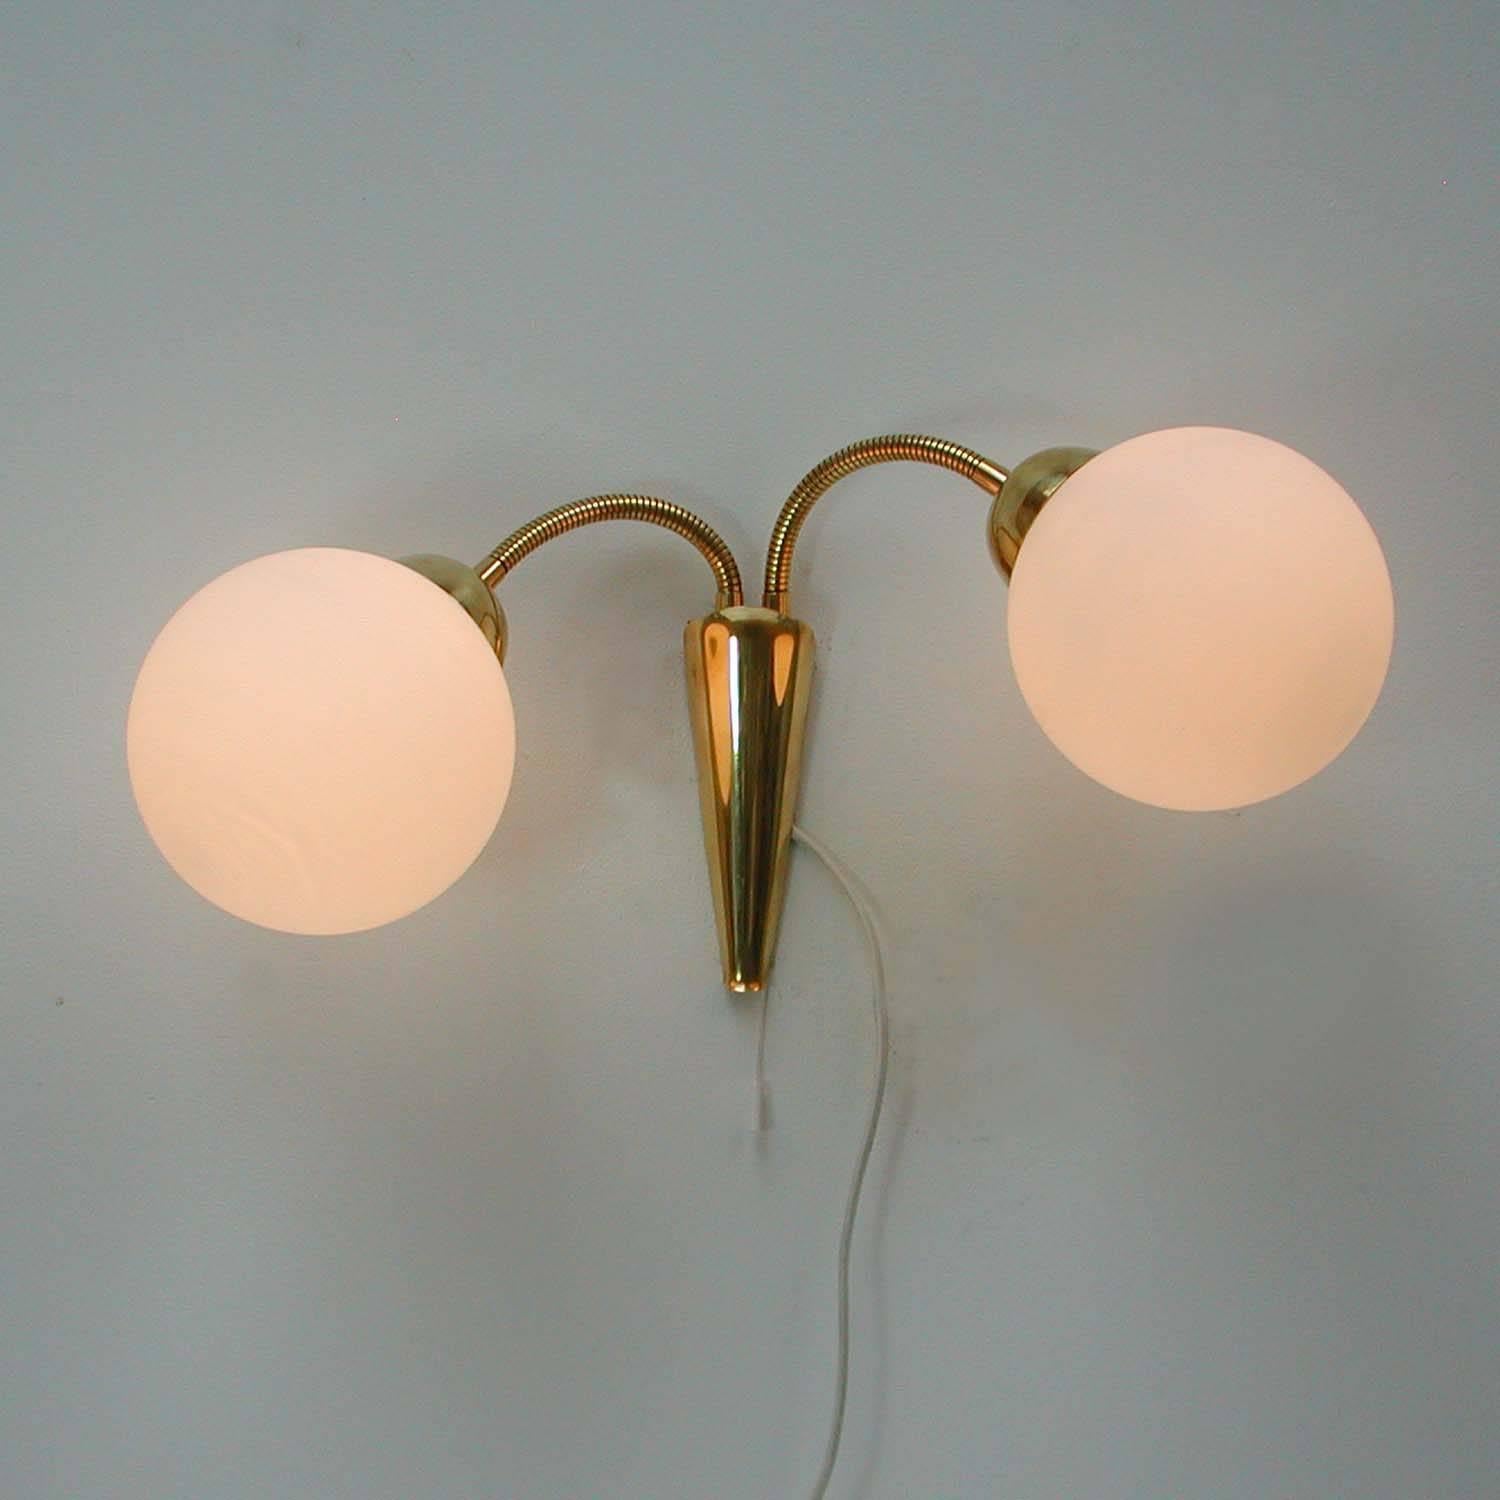 Midcentury Italian Double-Gooseneck Brass and Opal Glass Sconce, 1950s For Sale 1